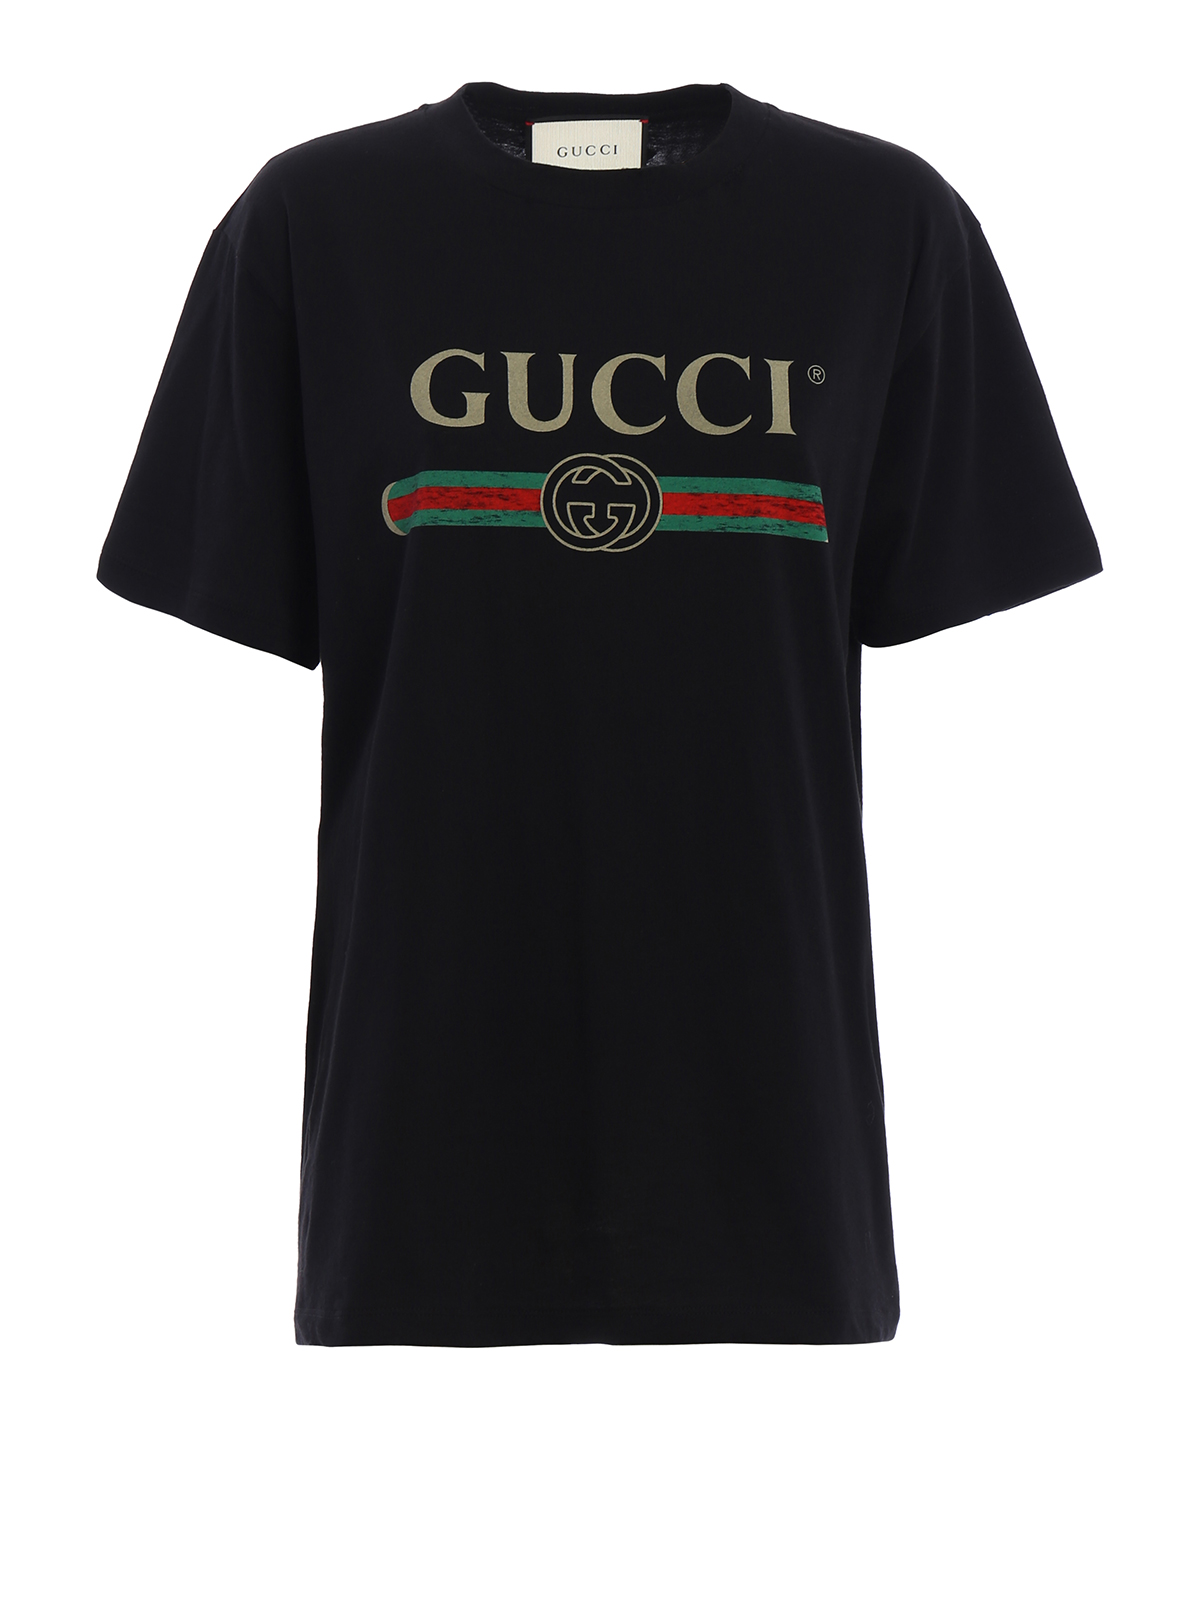 cost of gucci t shirt